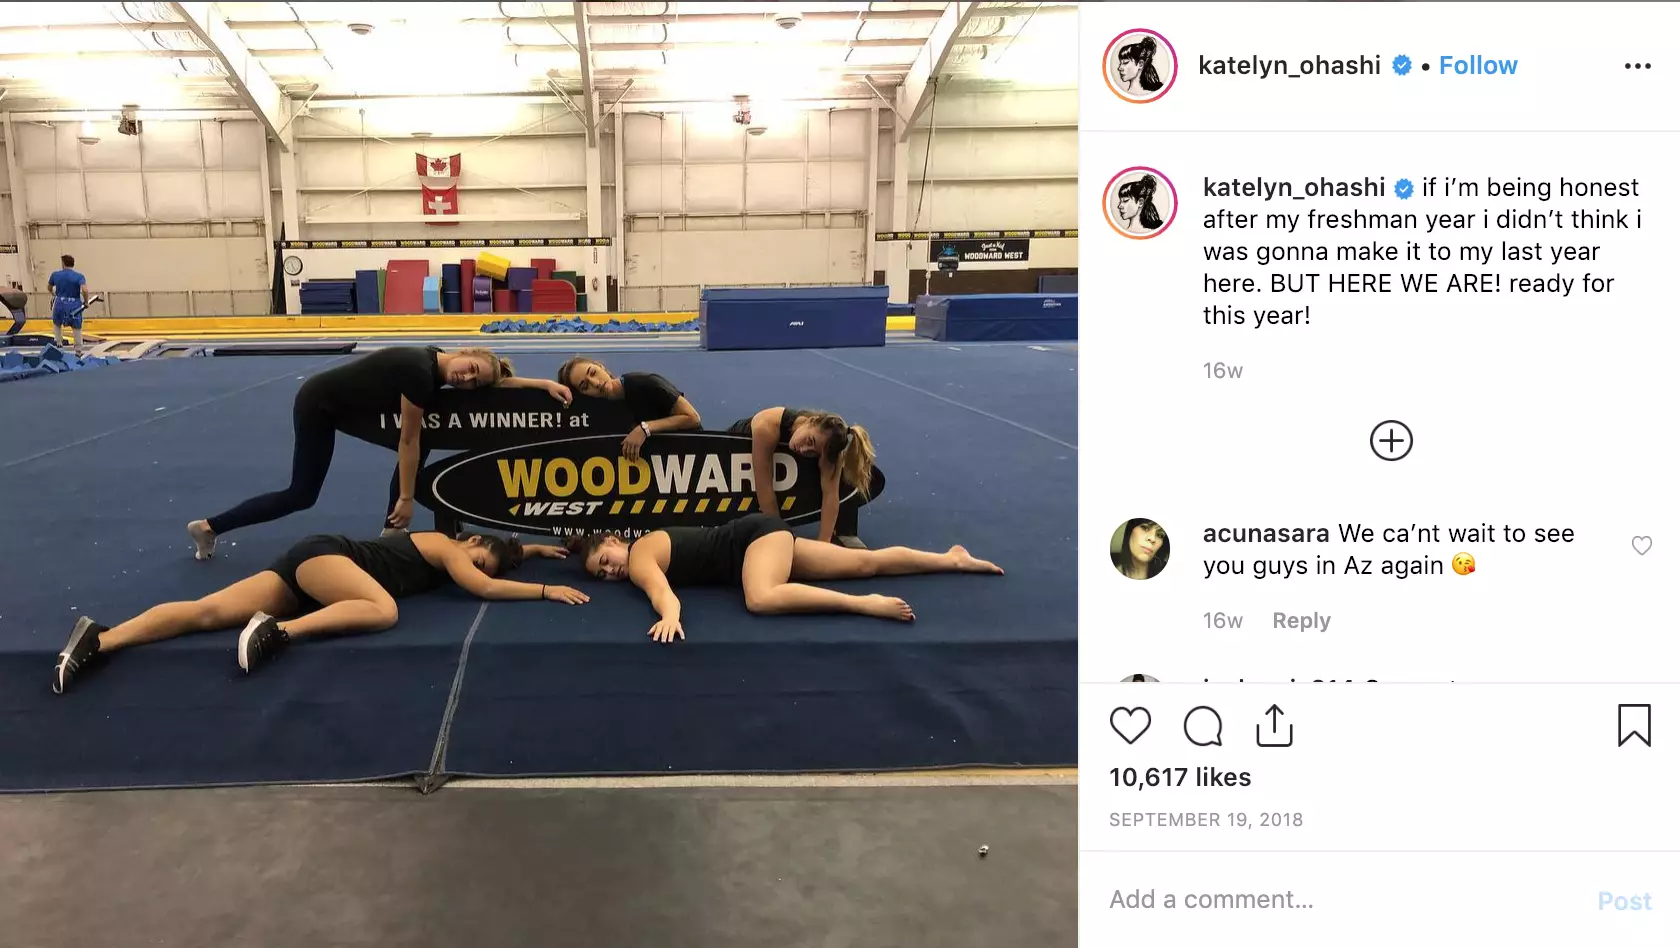 Katelyn says the sport has taken an enormous toll on her body and mind.